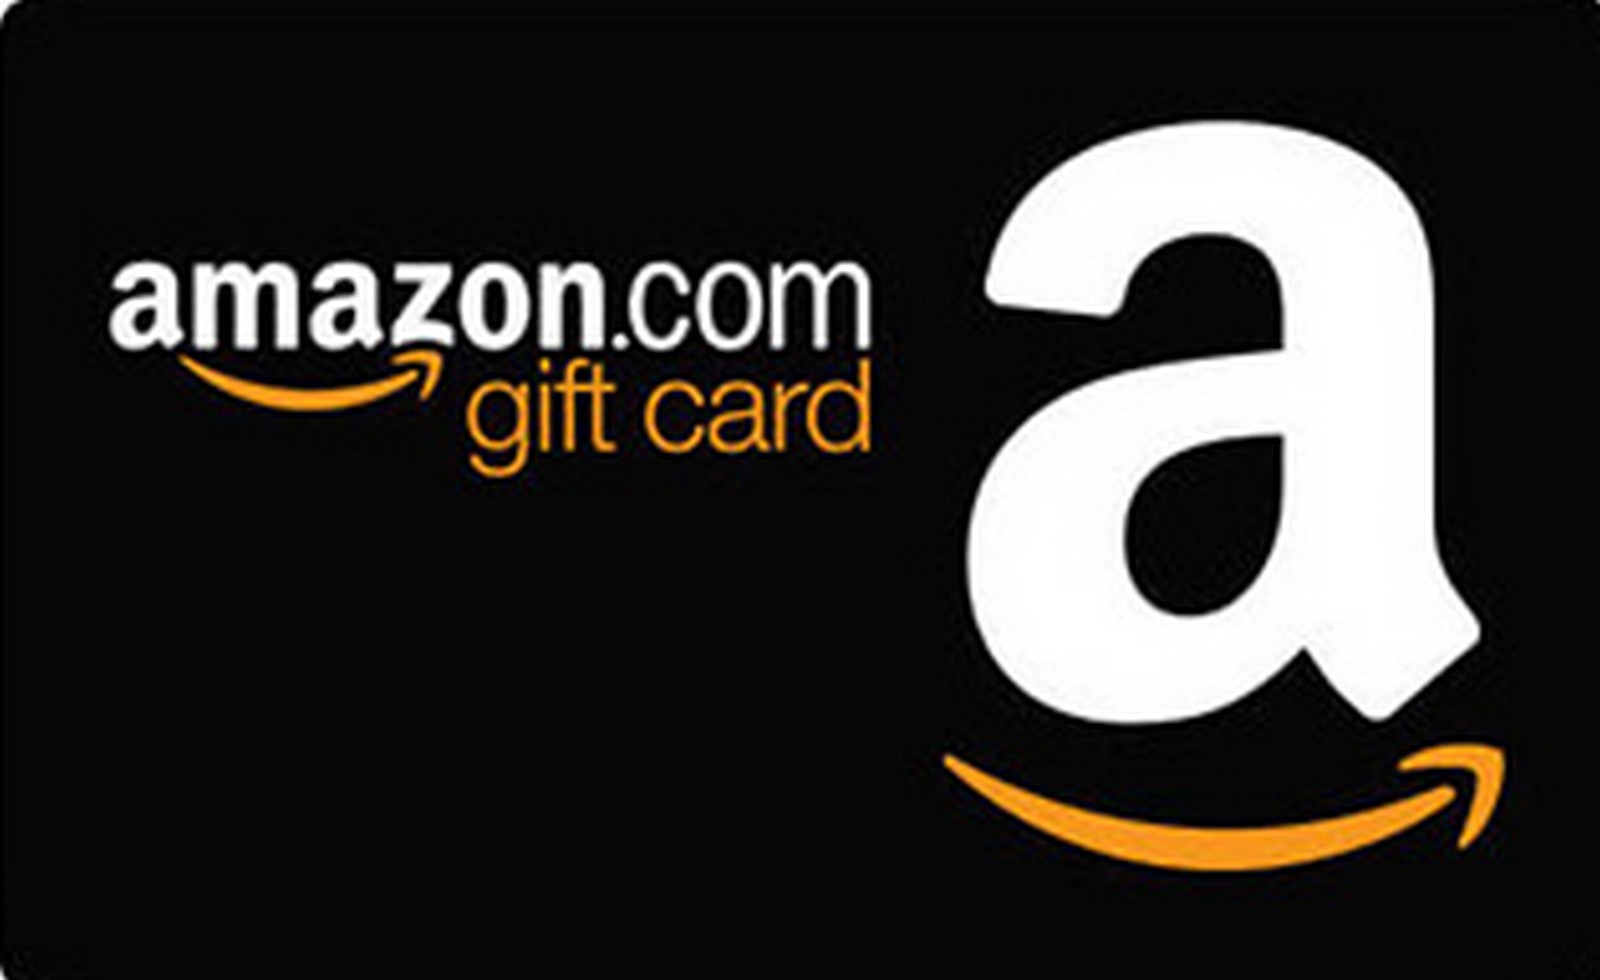 Amazon Honors Gift Card Deal